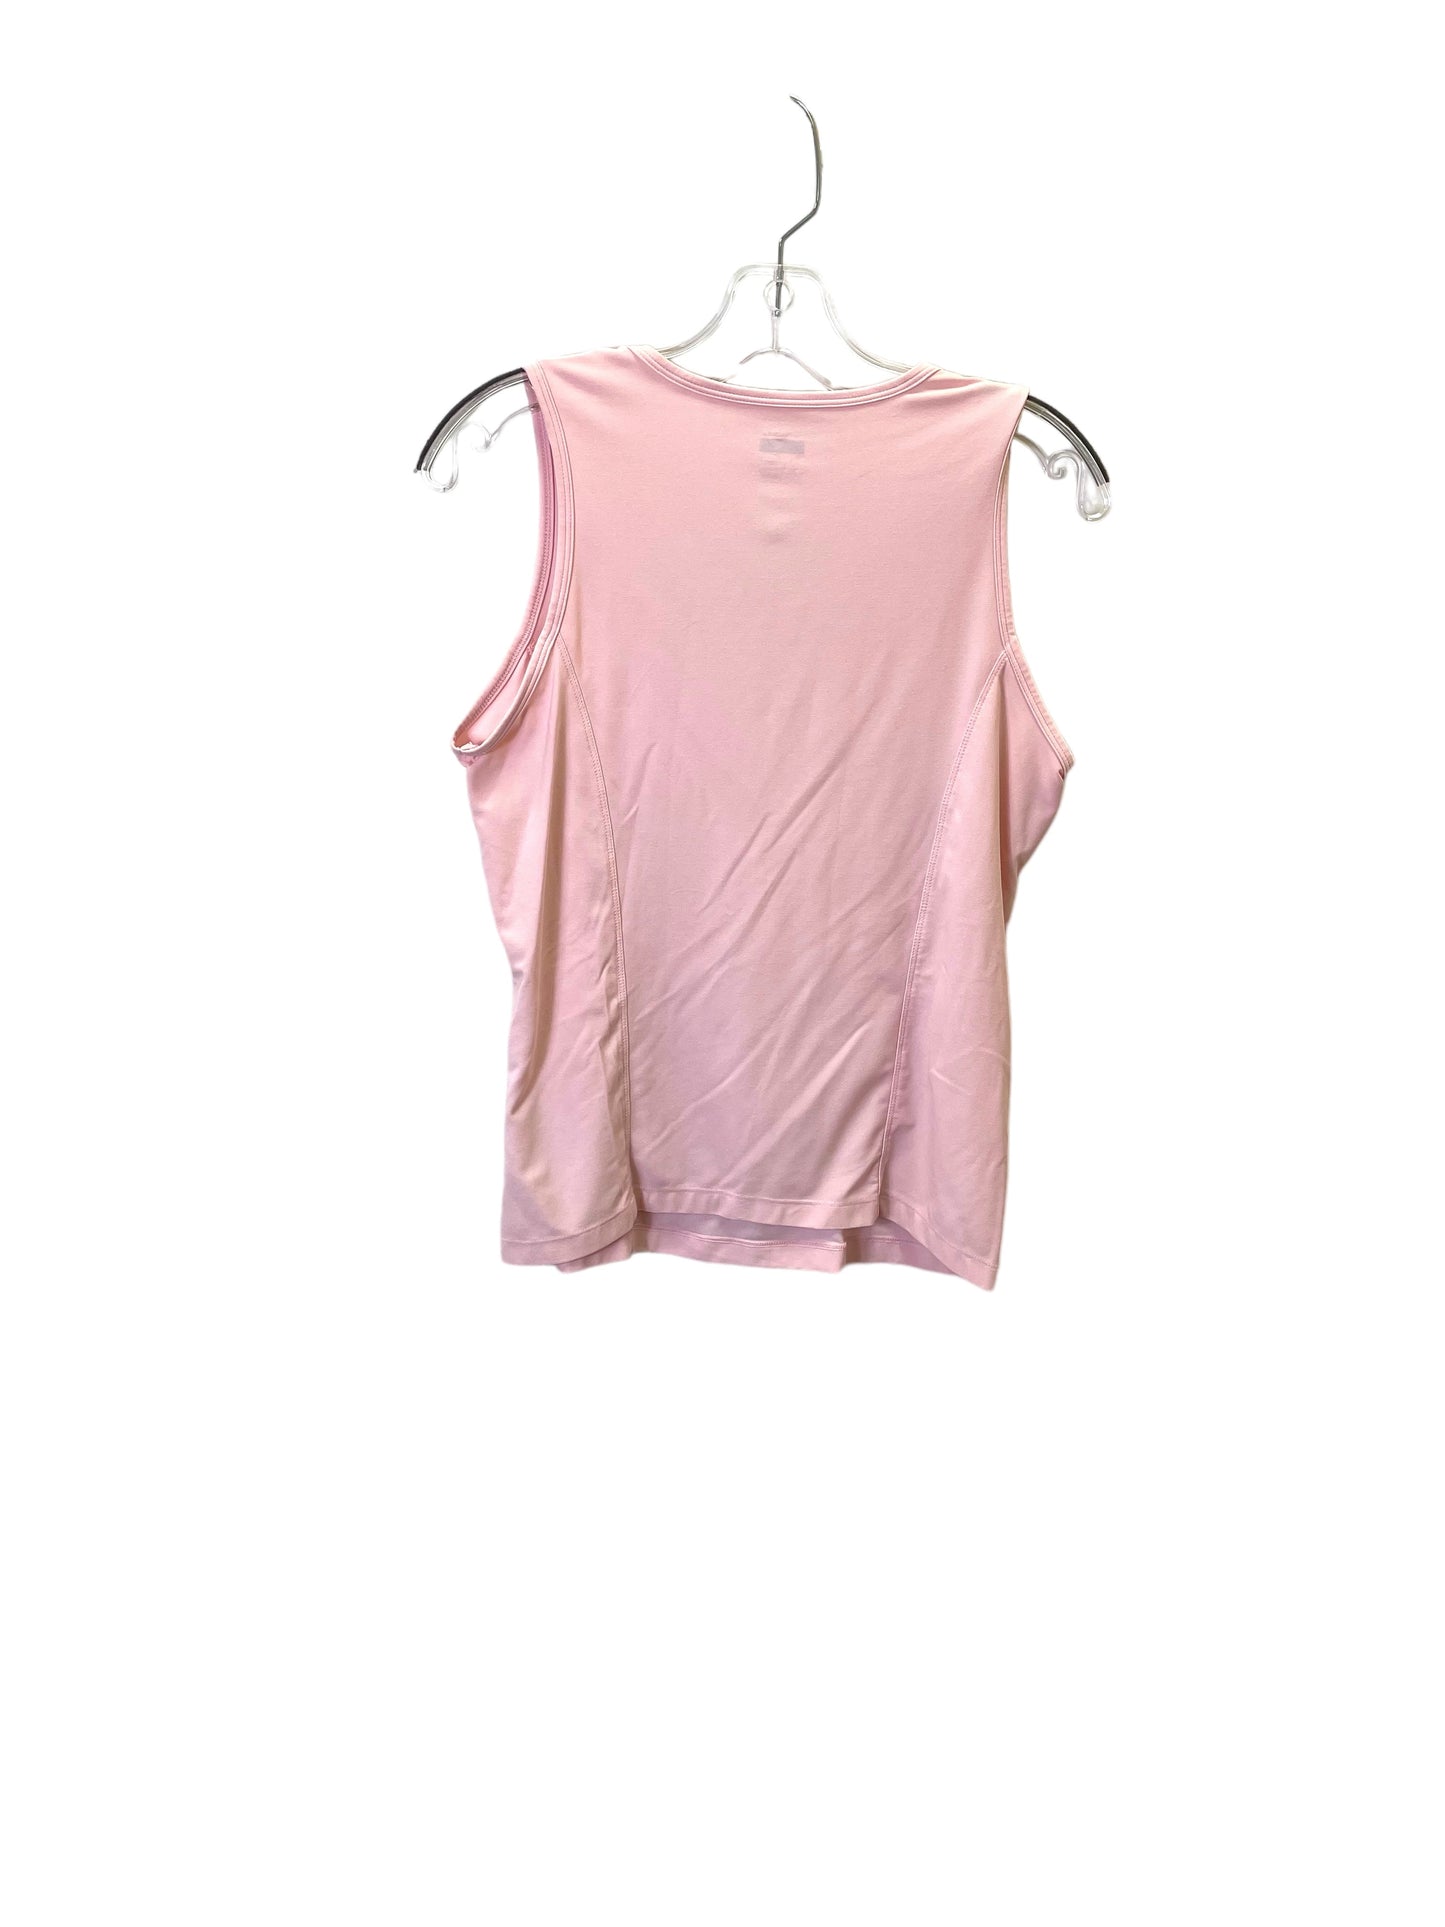 Pink Athletic Tank Top By Nike, Size: L